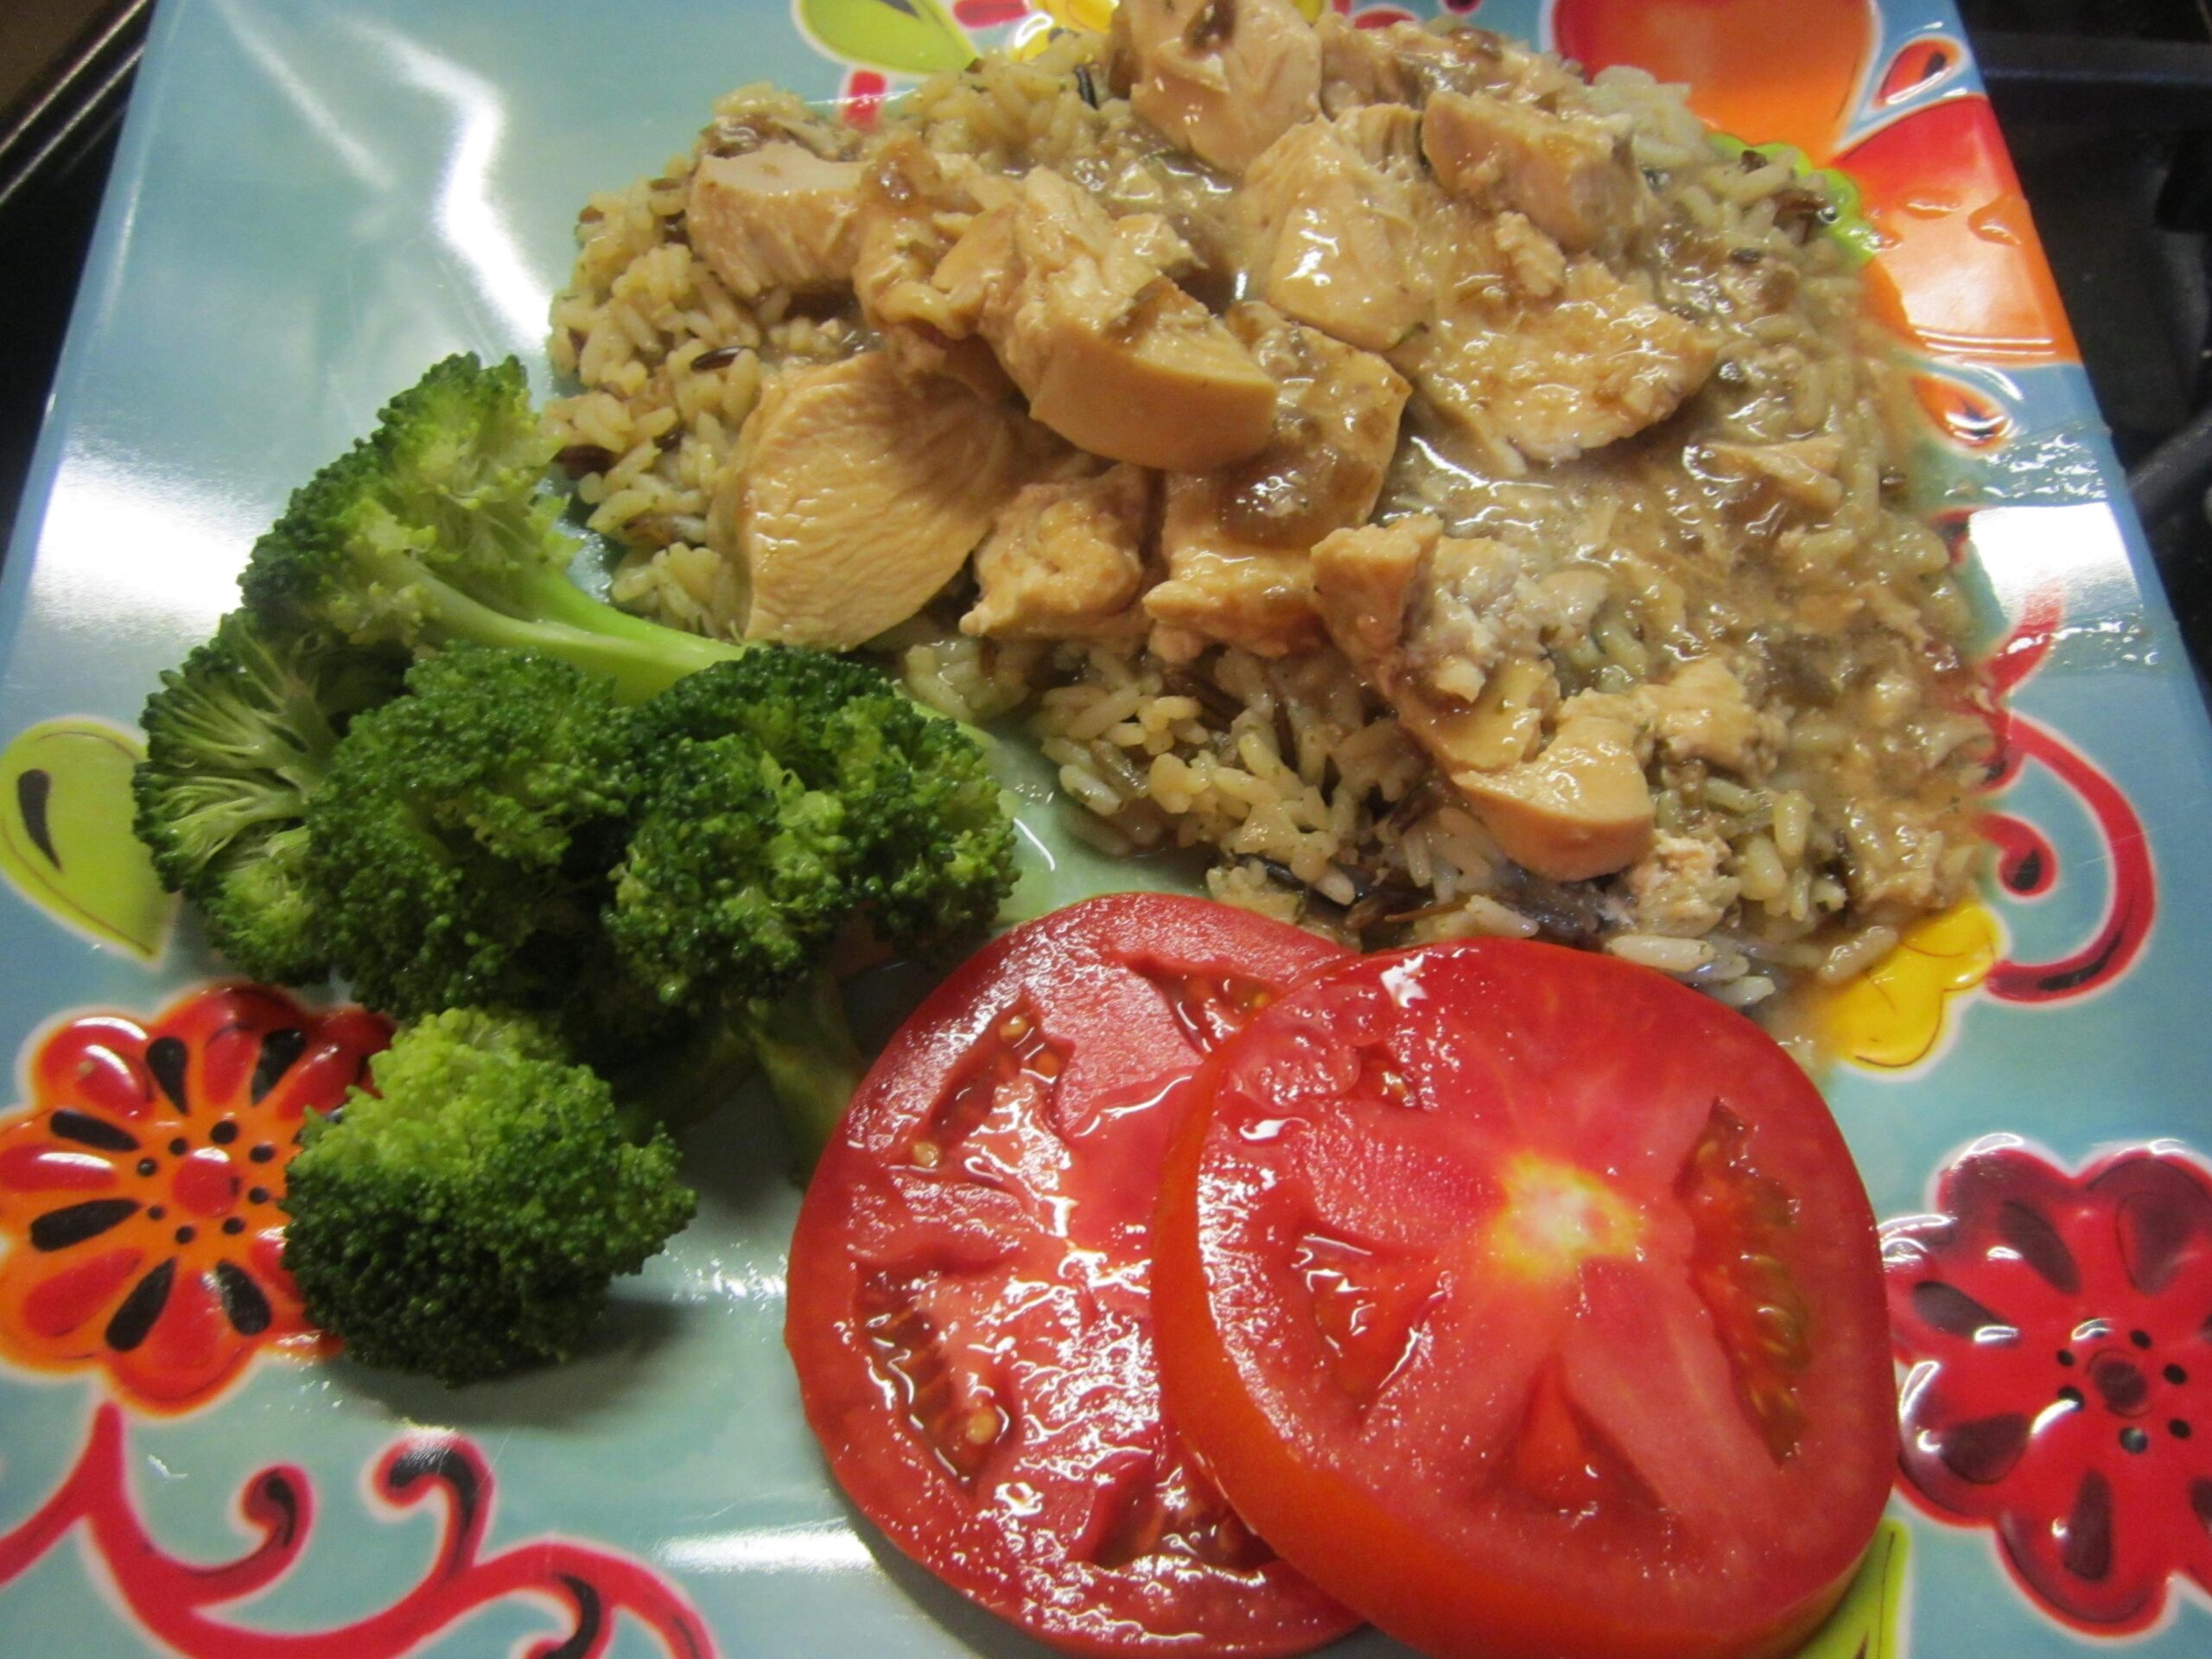  Slow-cooked to perfection: Crock Pot Chicken in Wine